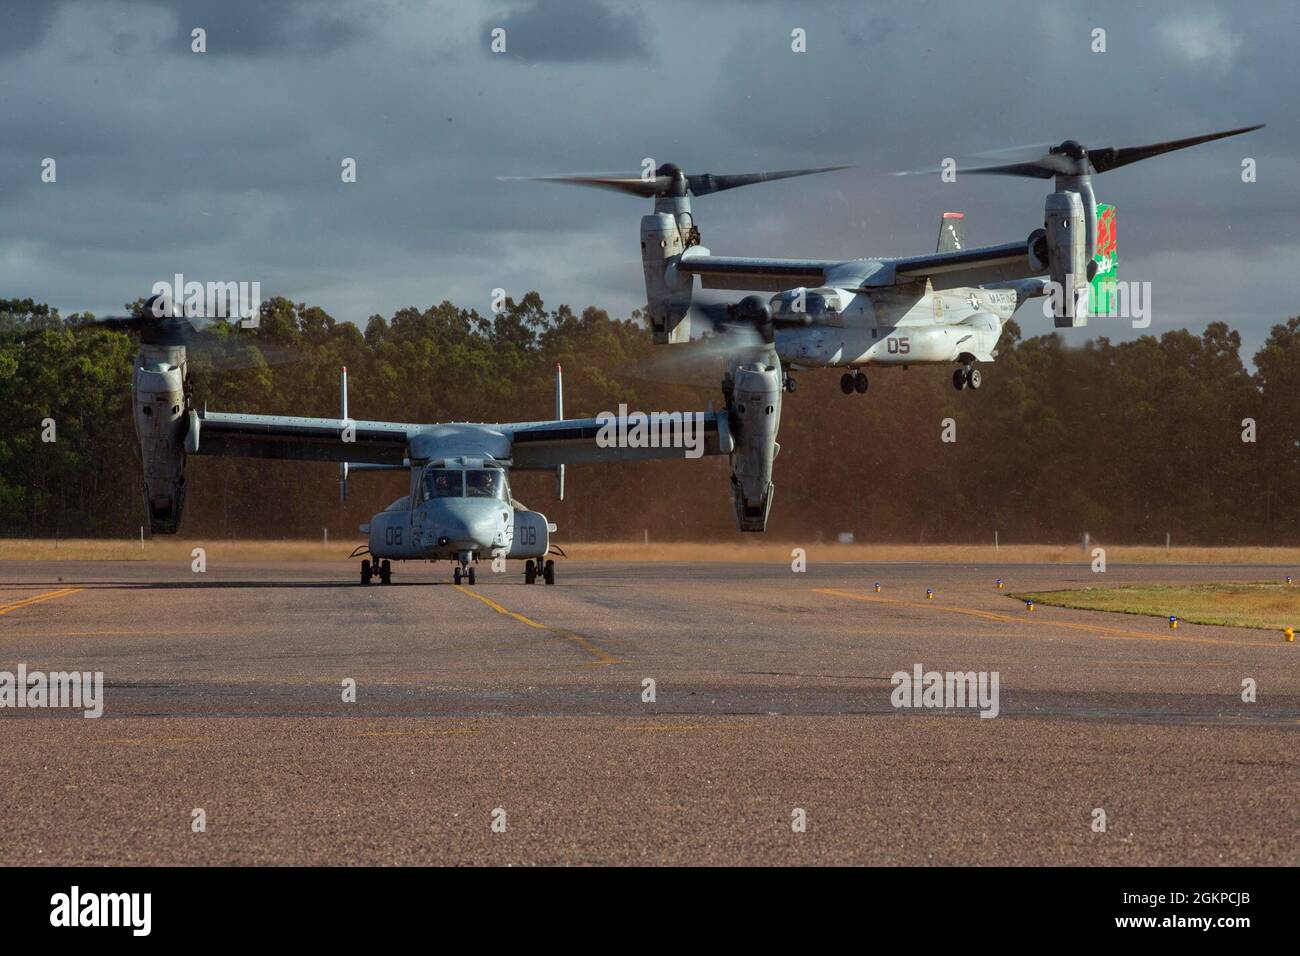 Two MV-22B Ospreys with Marine Rotational Force – Darwin land during Exercise Darrandarra at Gove Airport, Nhulunbuy, NT, Australia, June 12, 2021. The MV-22B Ospreys flew from Darwin to Nhulunbuy to deliver troops and equipment to support the exercise, demonstrating the Marine Corps’ long range airborne operation capabilities. Darrandarra, meaning “together,” demonstrates the Marines Corps’ ability to operate with the Australian Defence Force and train to reinforce embassies in response to crisis and contingencies in the Indo-Pacific region. Stock Photo